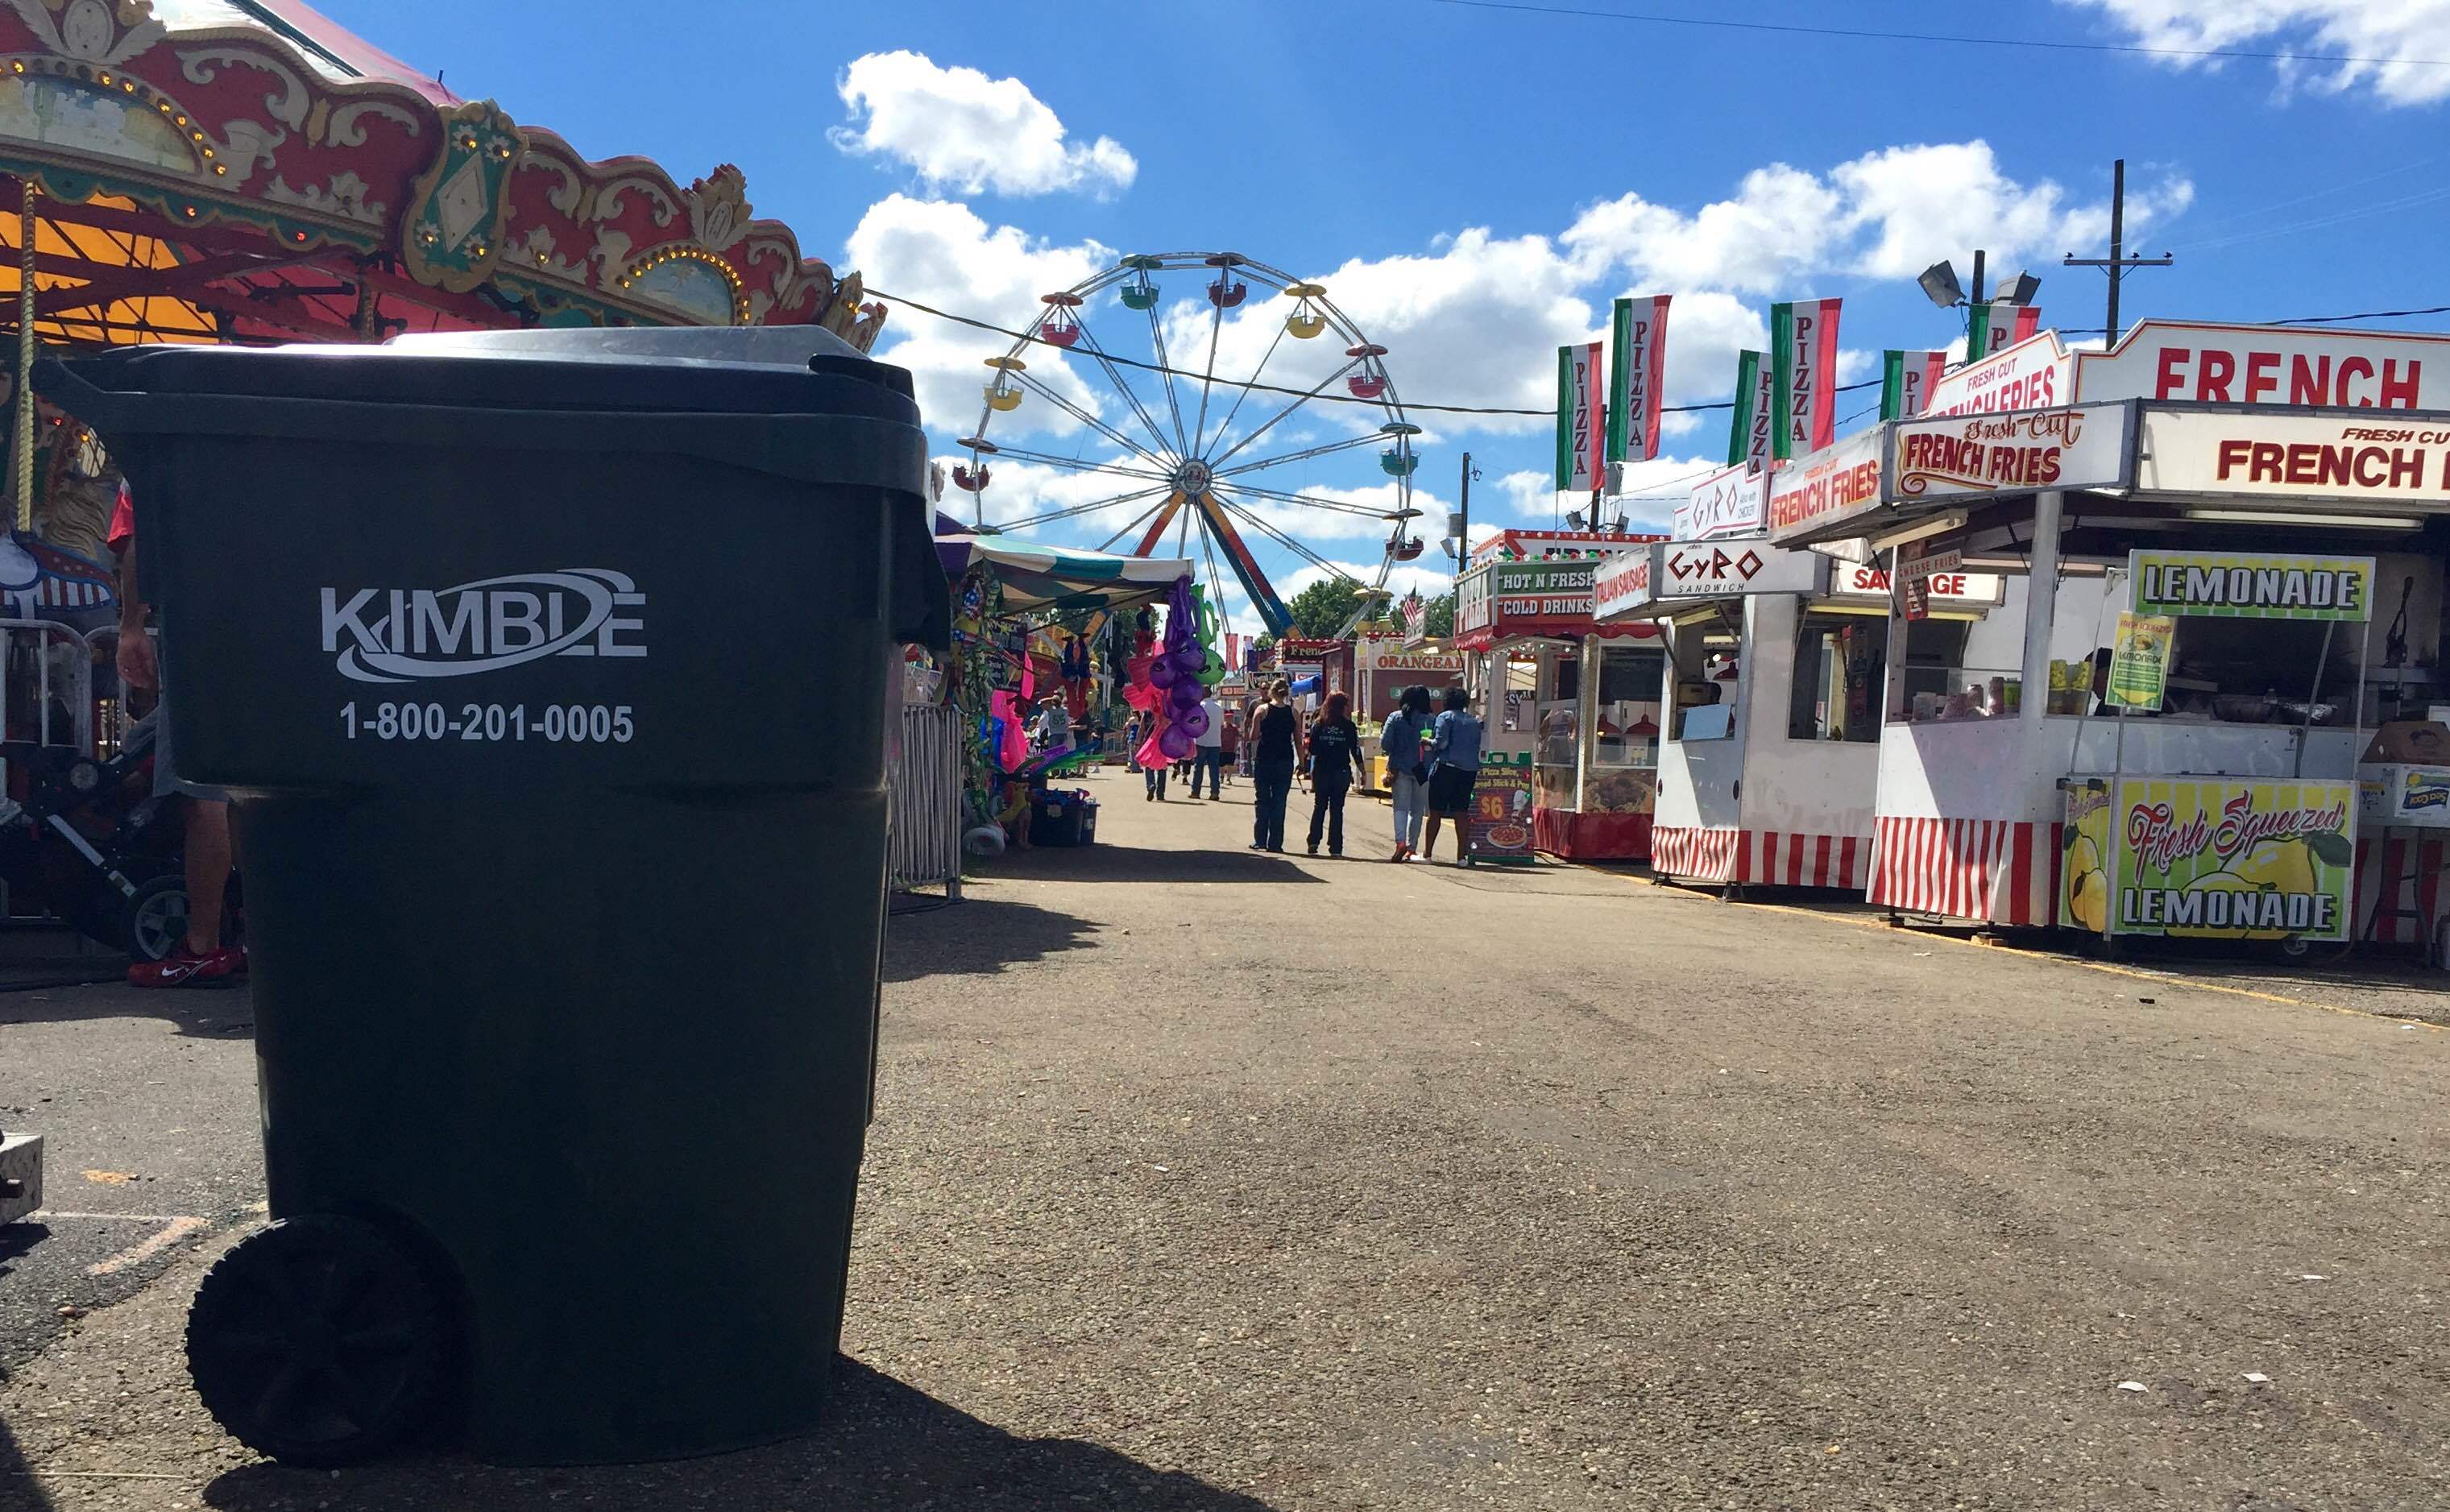 Kimble trash and recycling can at fairgrounds